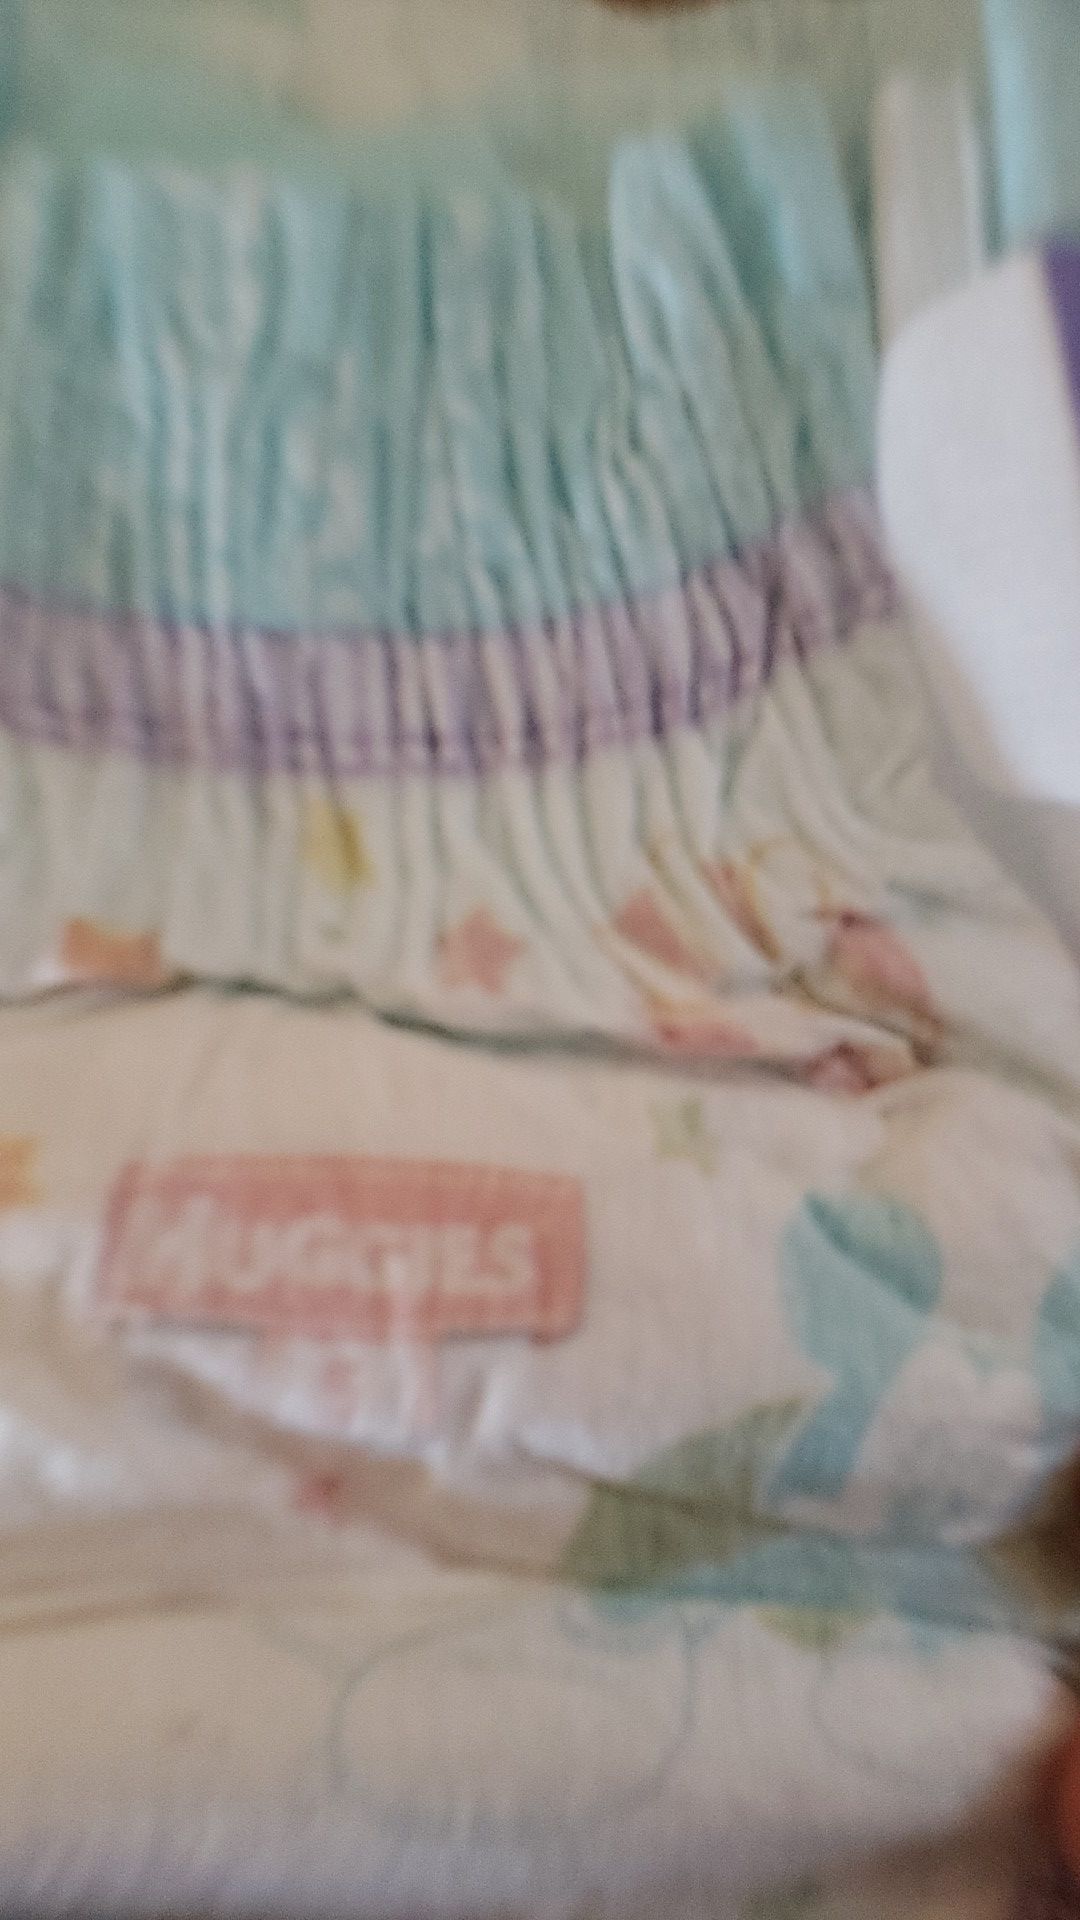 16 misc diapers Huggies, Luvs size 5